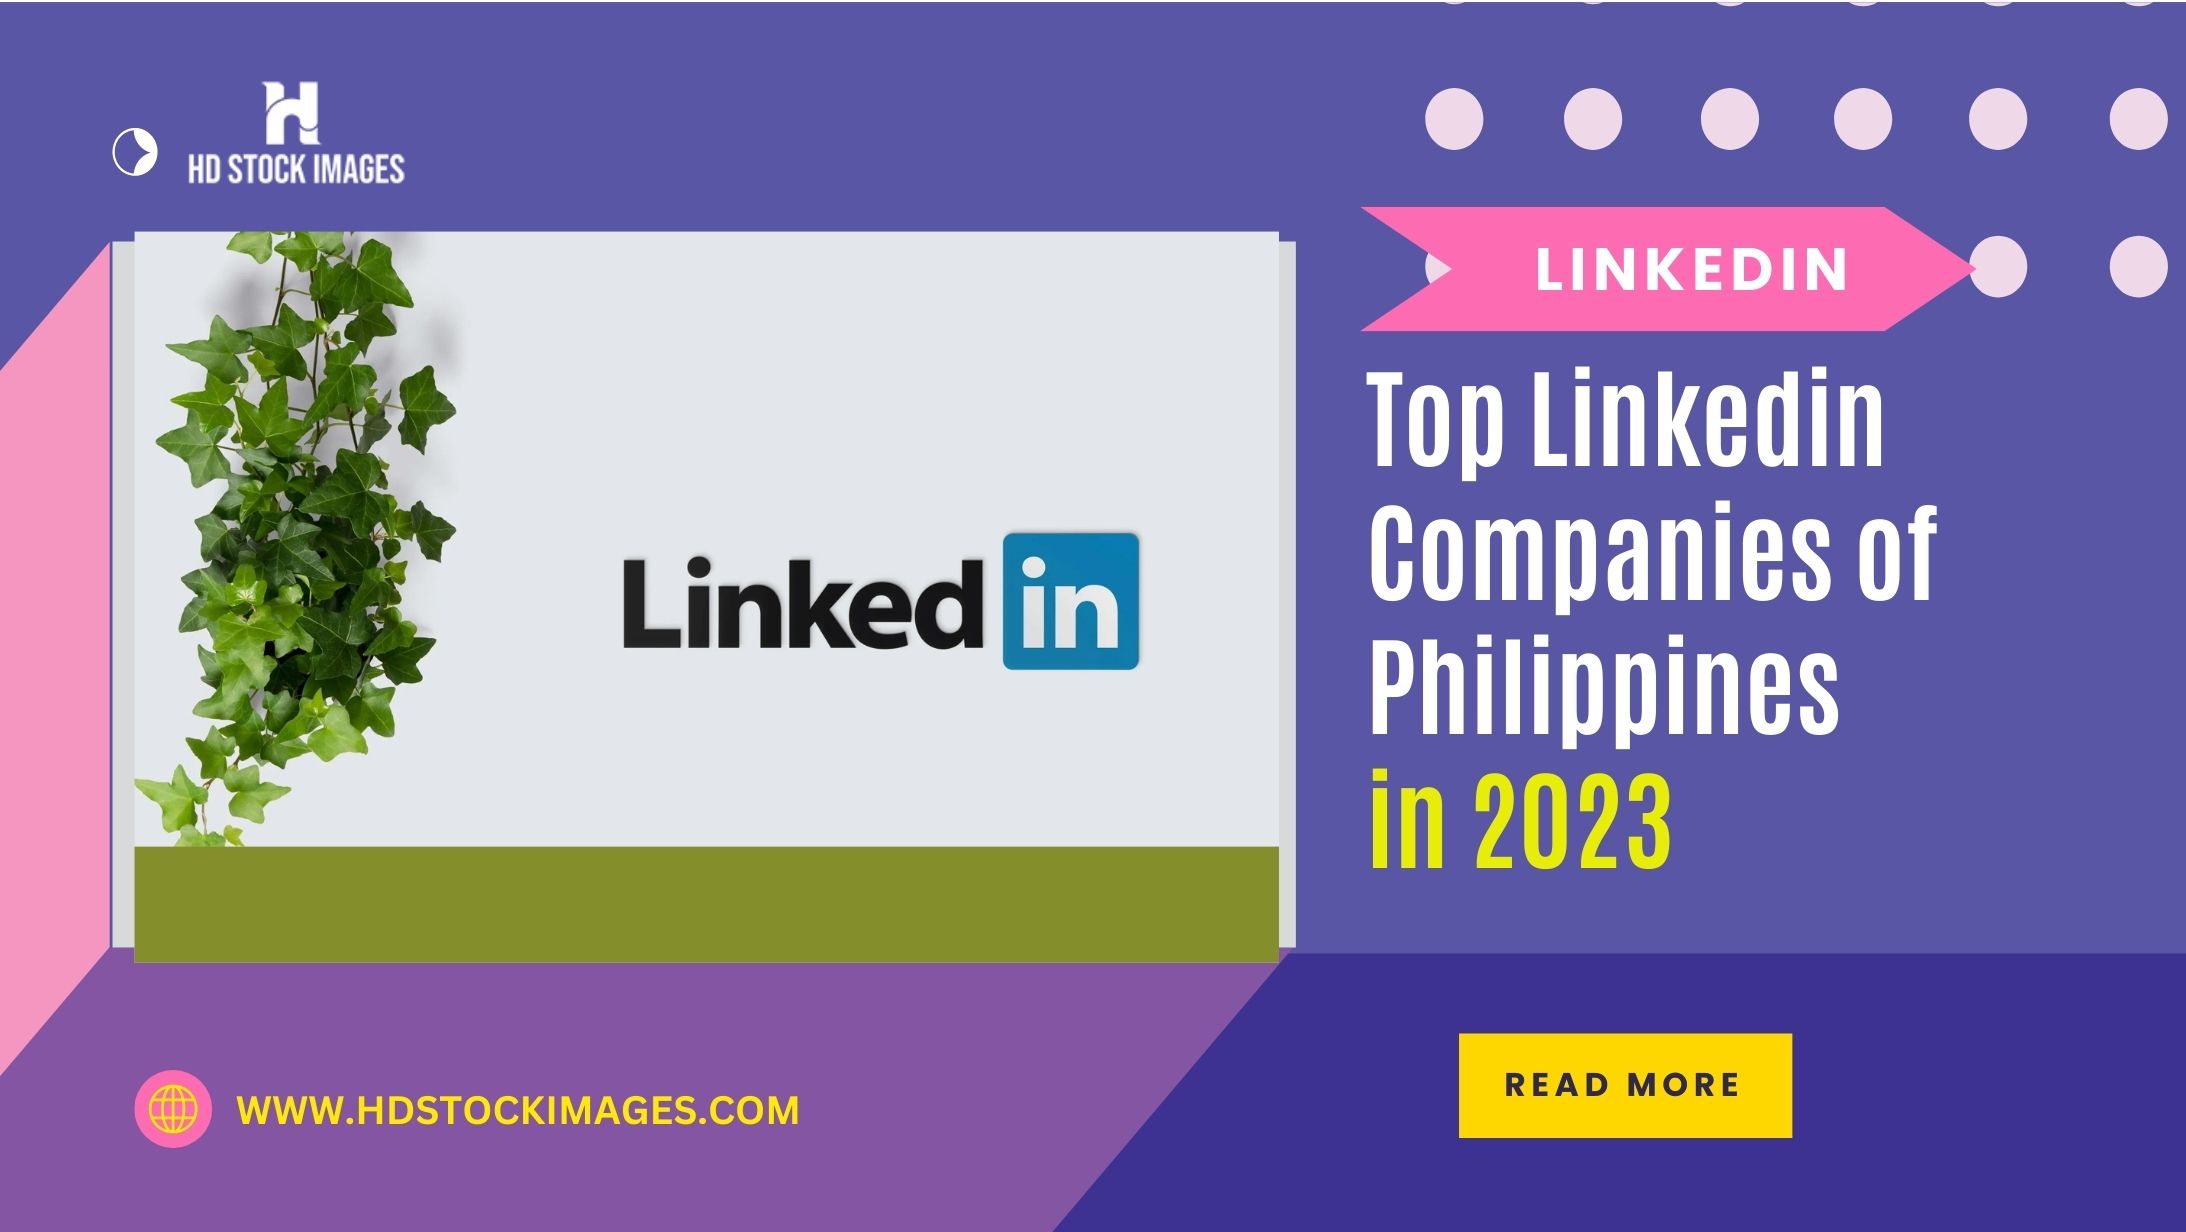 an image of List of Top Linkedin Companies of Philippines in 2023